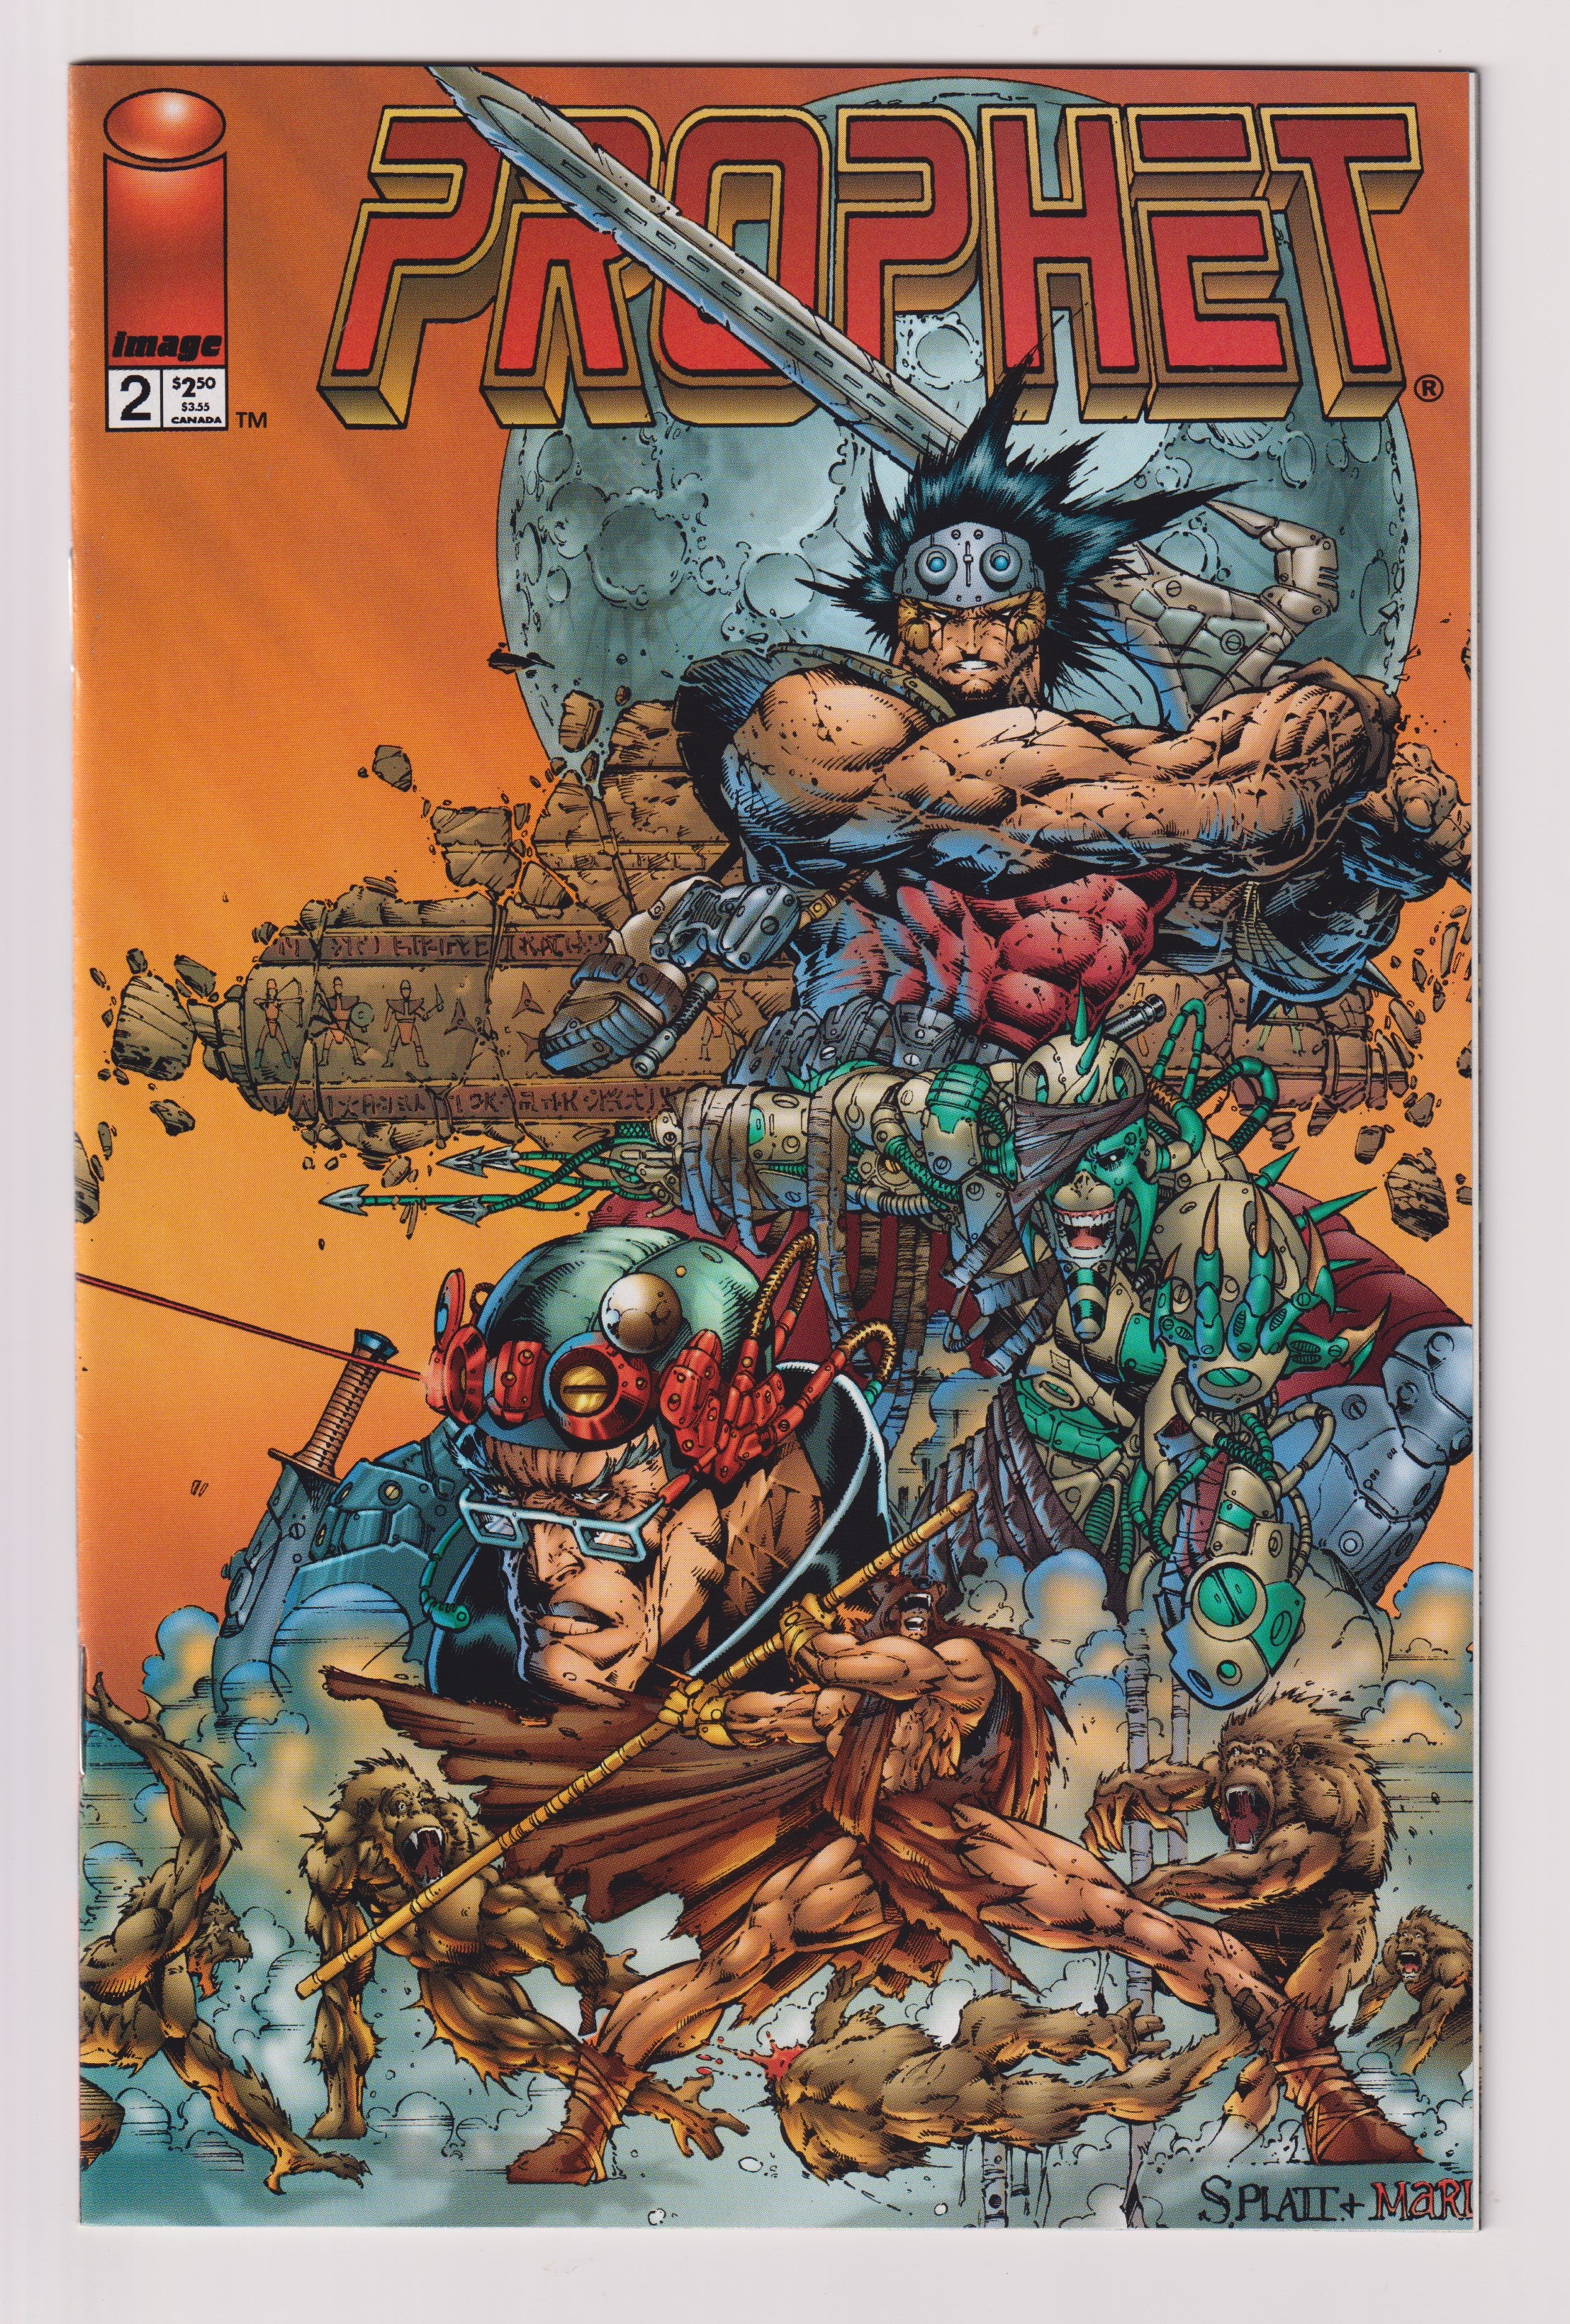 Photo of Prophet, Vol. 2 (1995)  Iss 2A Near Mint  Comic sold by Stronghold Collectibles